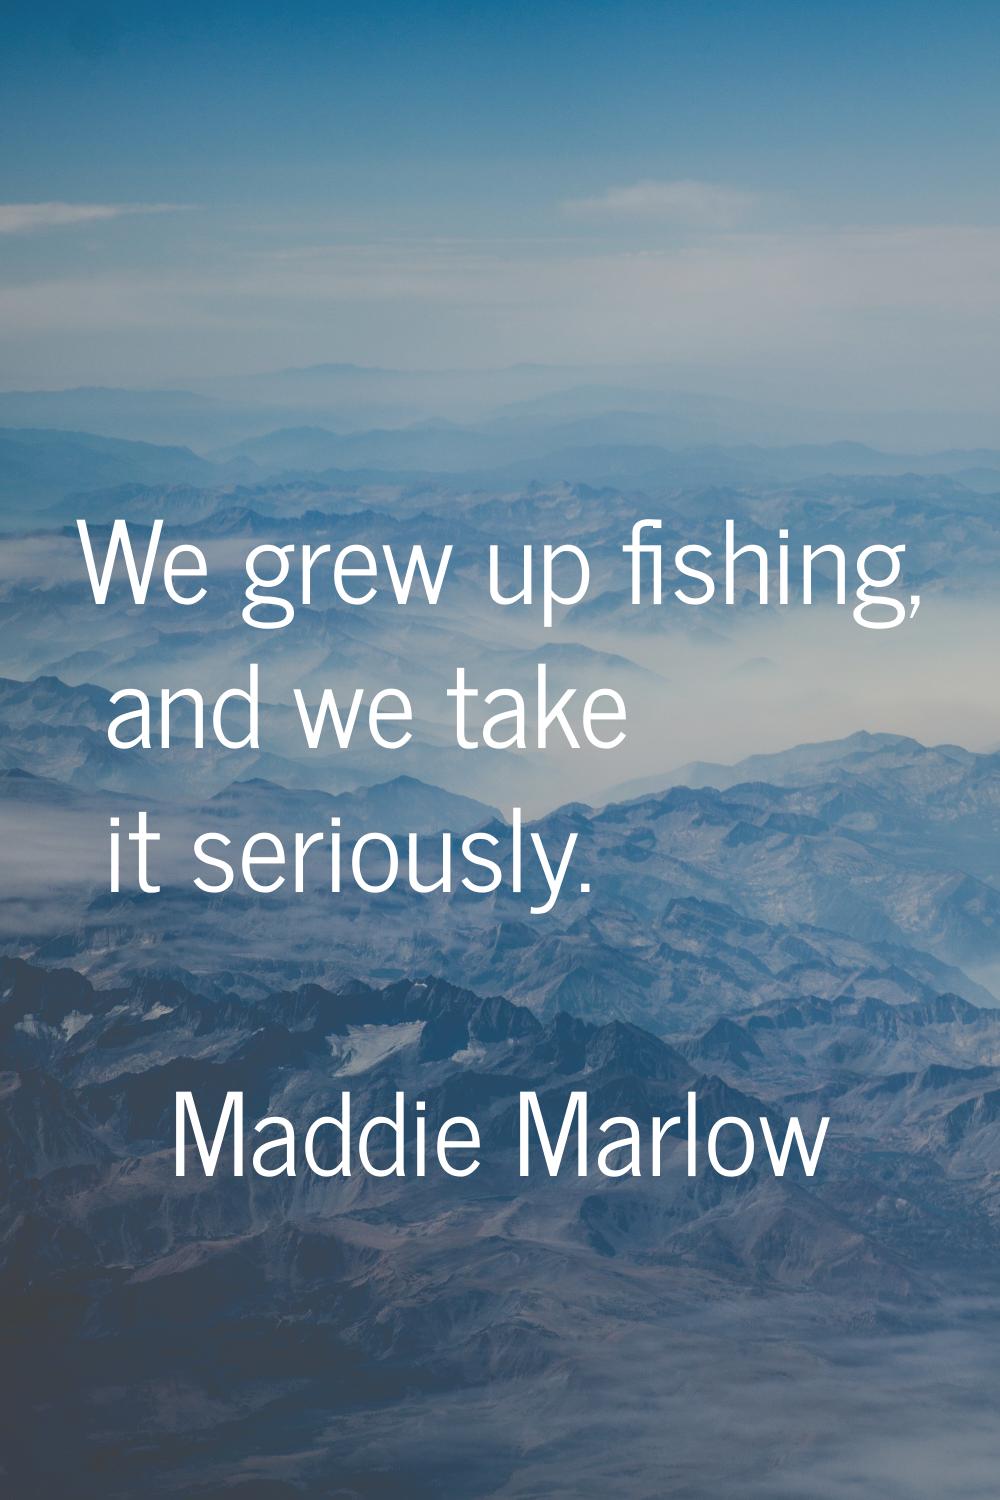 We grew up fishing, and we take it seriously.